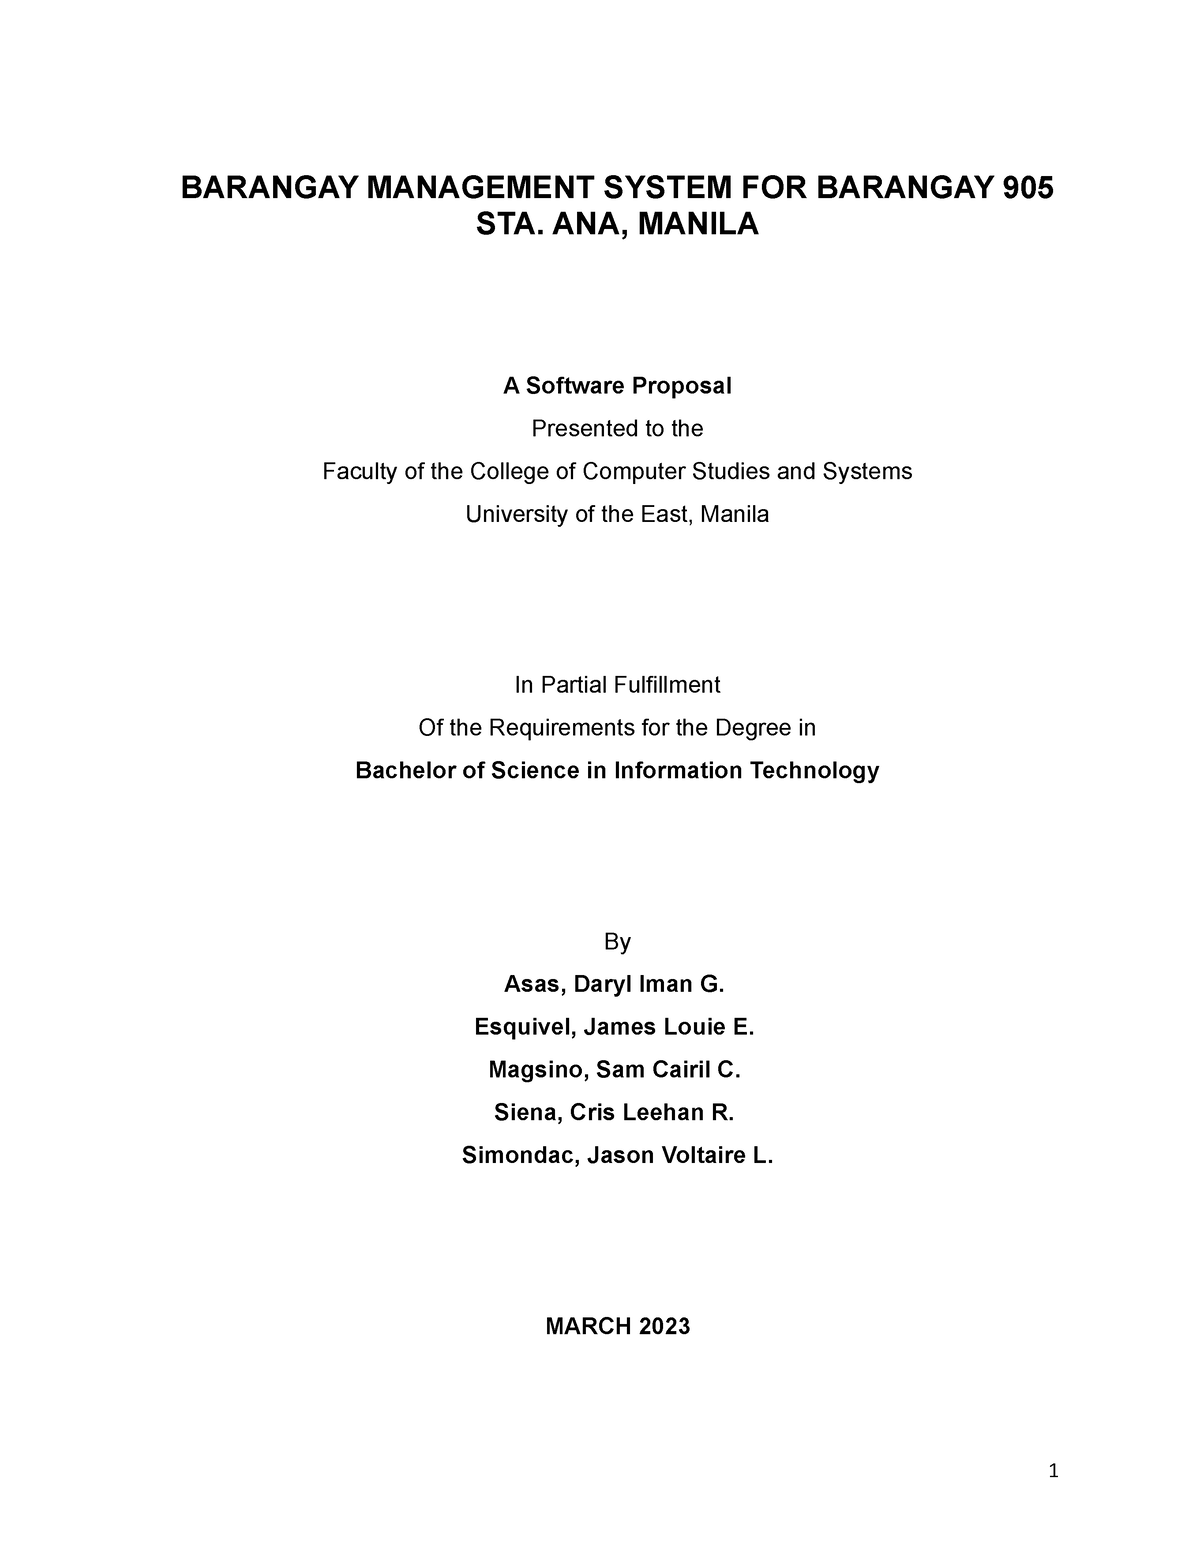 example of research proposal in barangay